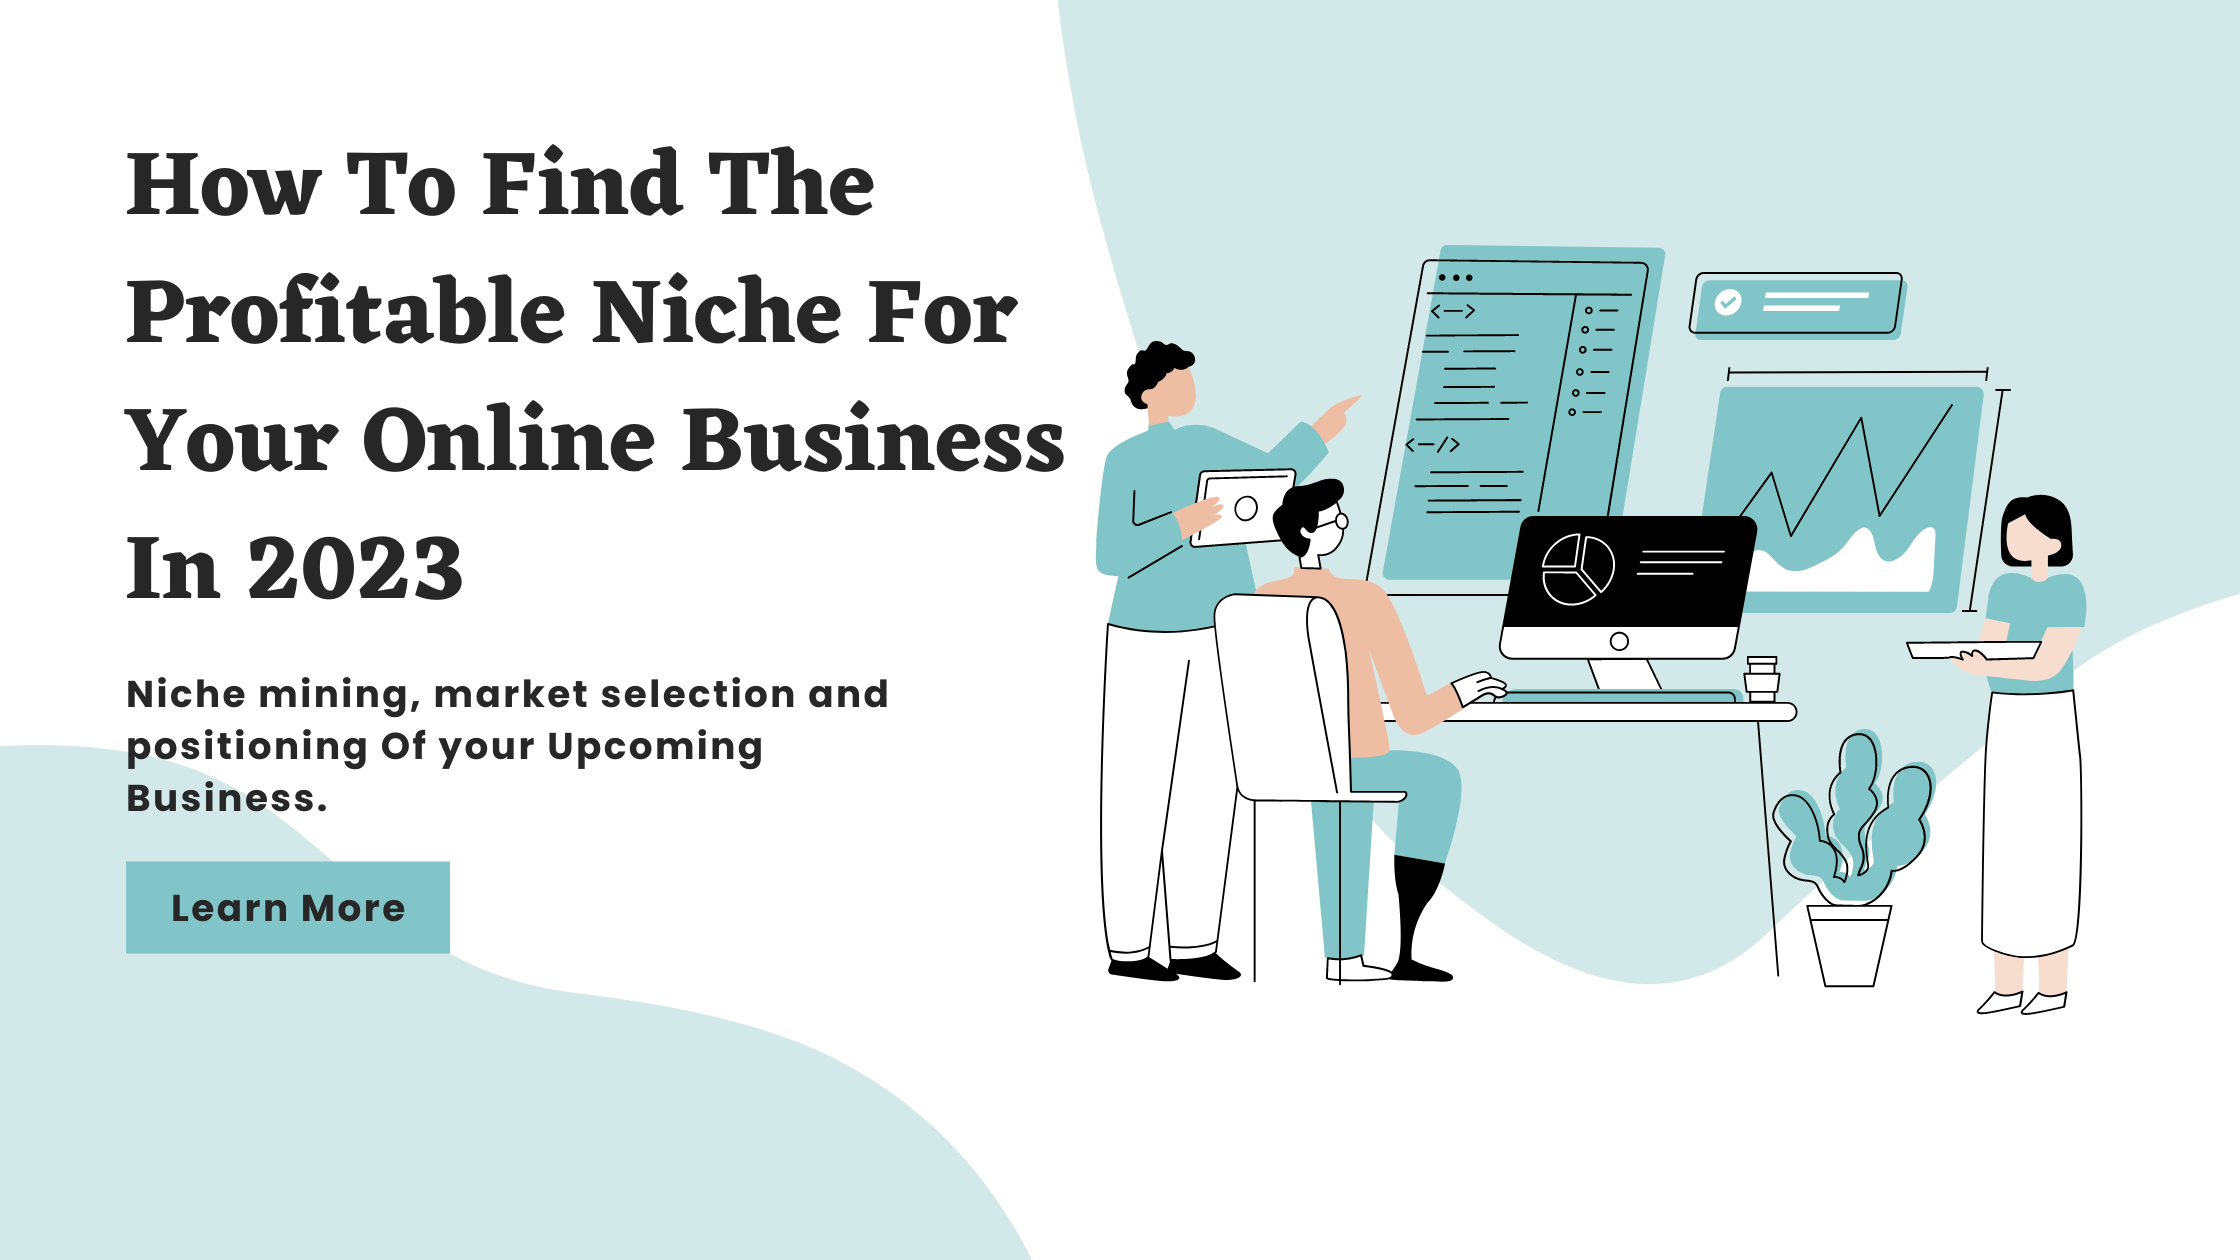 How To Find The Profitable Niche For Your Online Business In 2023